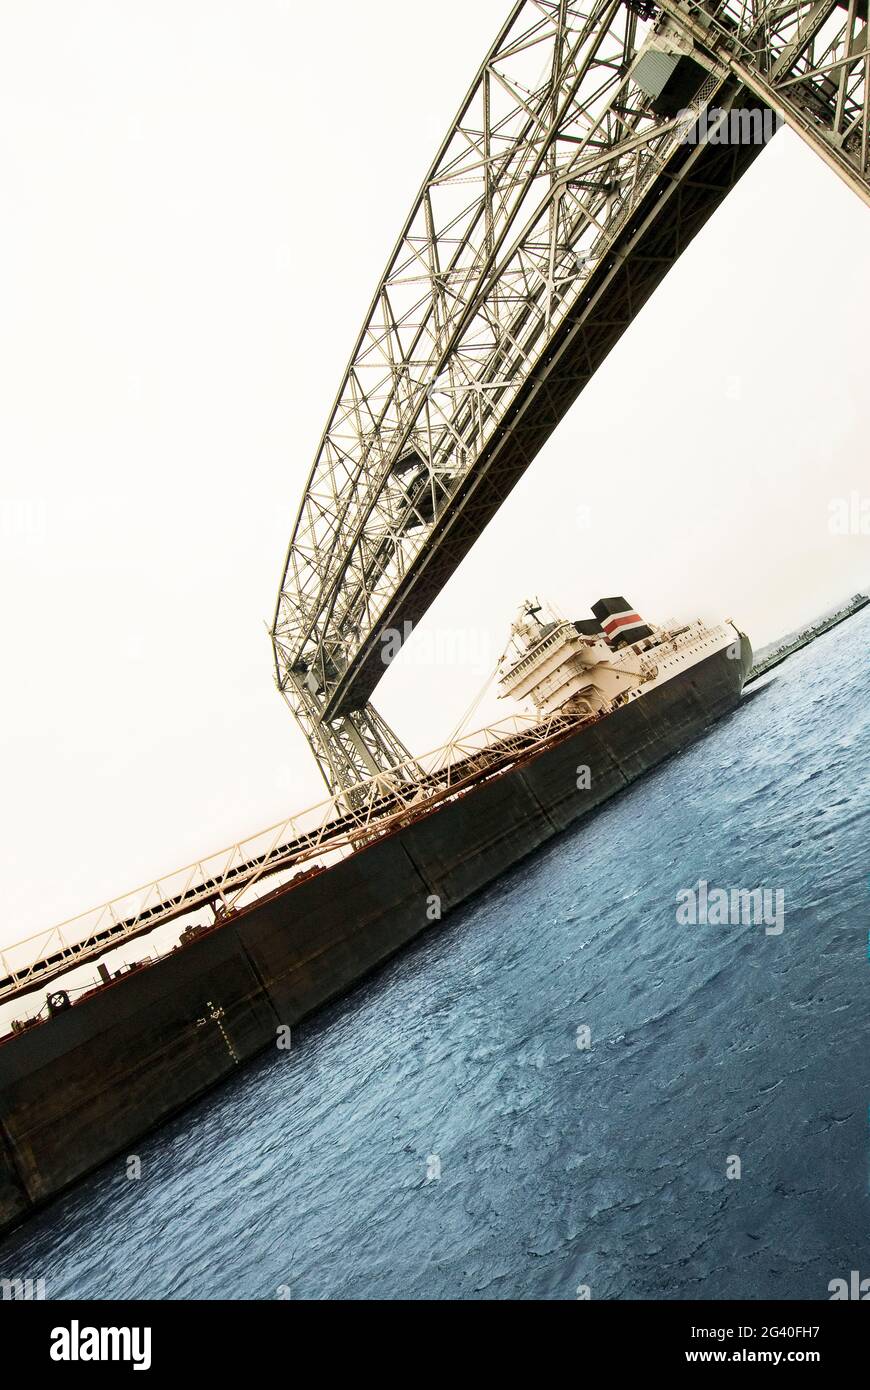 'M/V James R. Barker' arriving from Lake Superior under the historic Aerial Lift Bridge to load coal in Port of Duluth/Superior, Duluth, MN. #908 USA Stock Photo